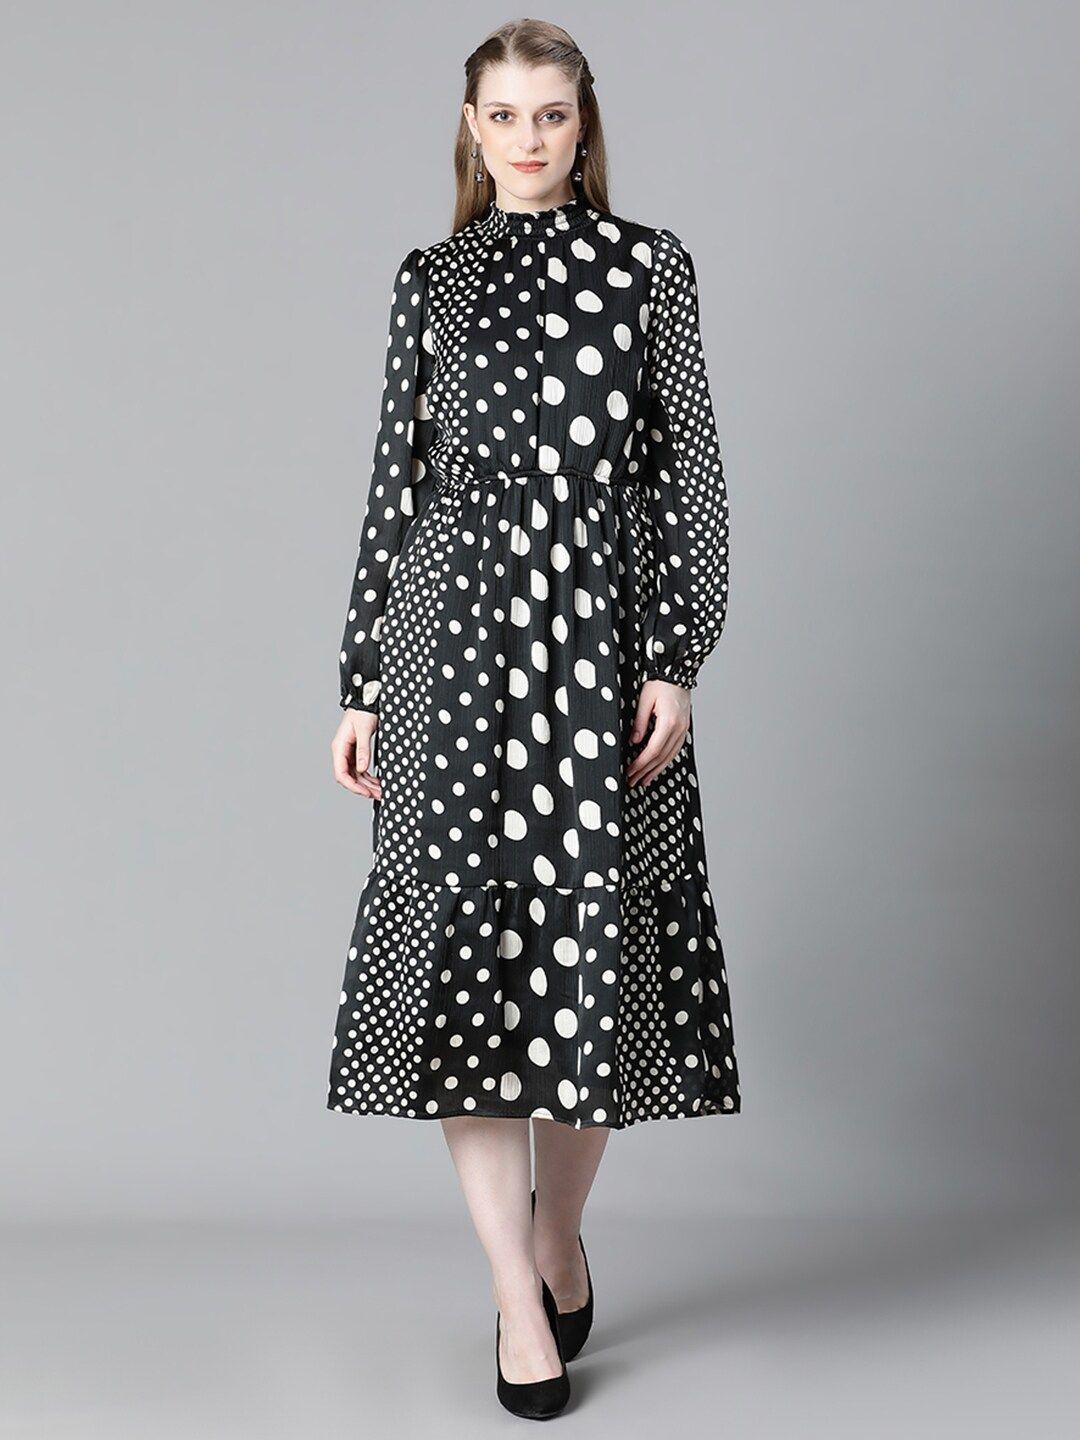 oxolloxo polka dots printed high neck puff sleeve monochrome georgette fit & flare dress